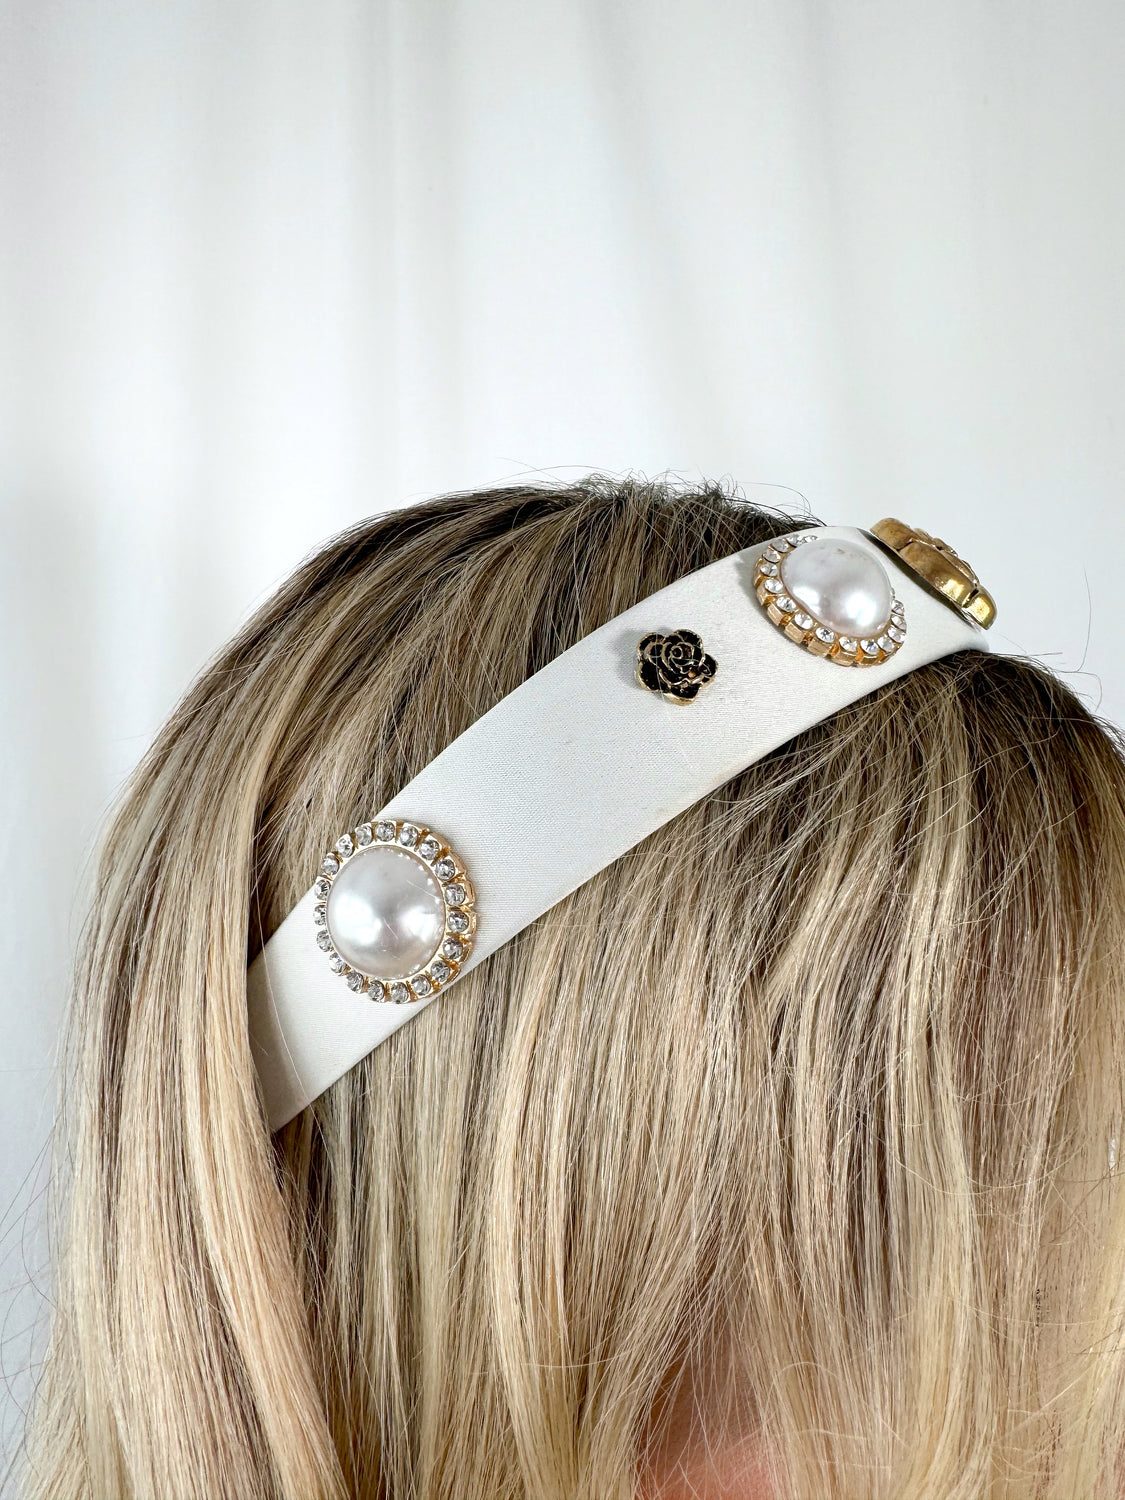 White Headband with Gold Flowers and Pearls